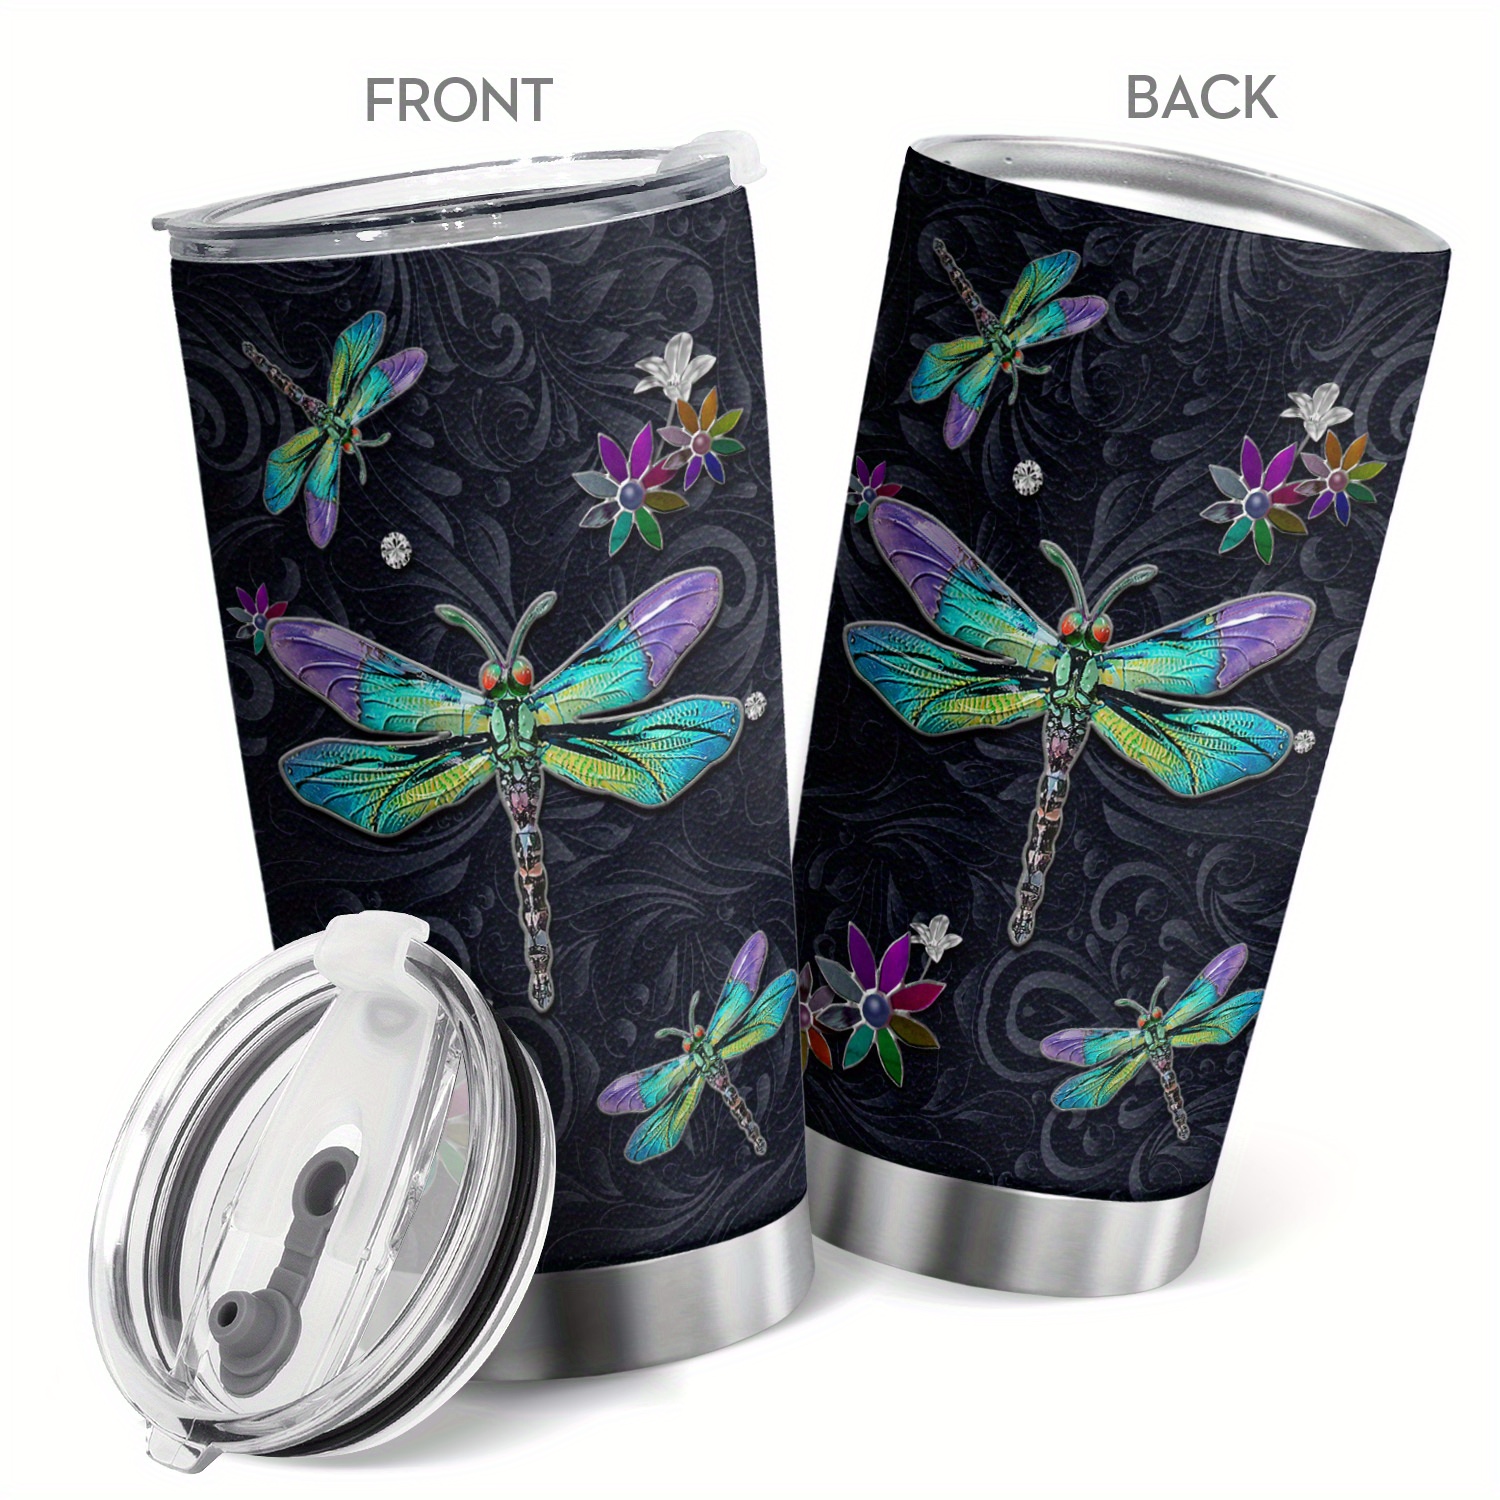 

1pc 20oz Dragonfly Tumbler For Women, Mom, Friends, Valentine's Day Gifts, Inspirational Gifts Dragonfly Tumbler Cup Travel Coffee Mug With Lid